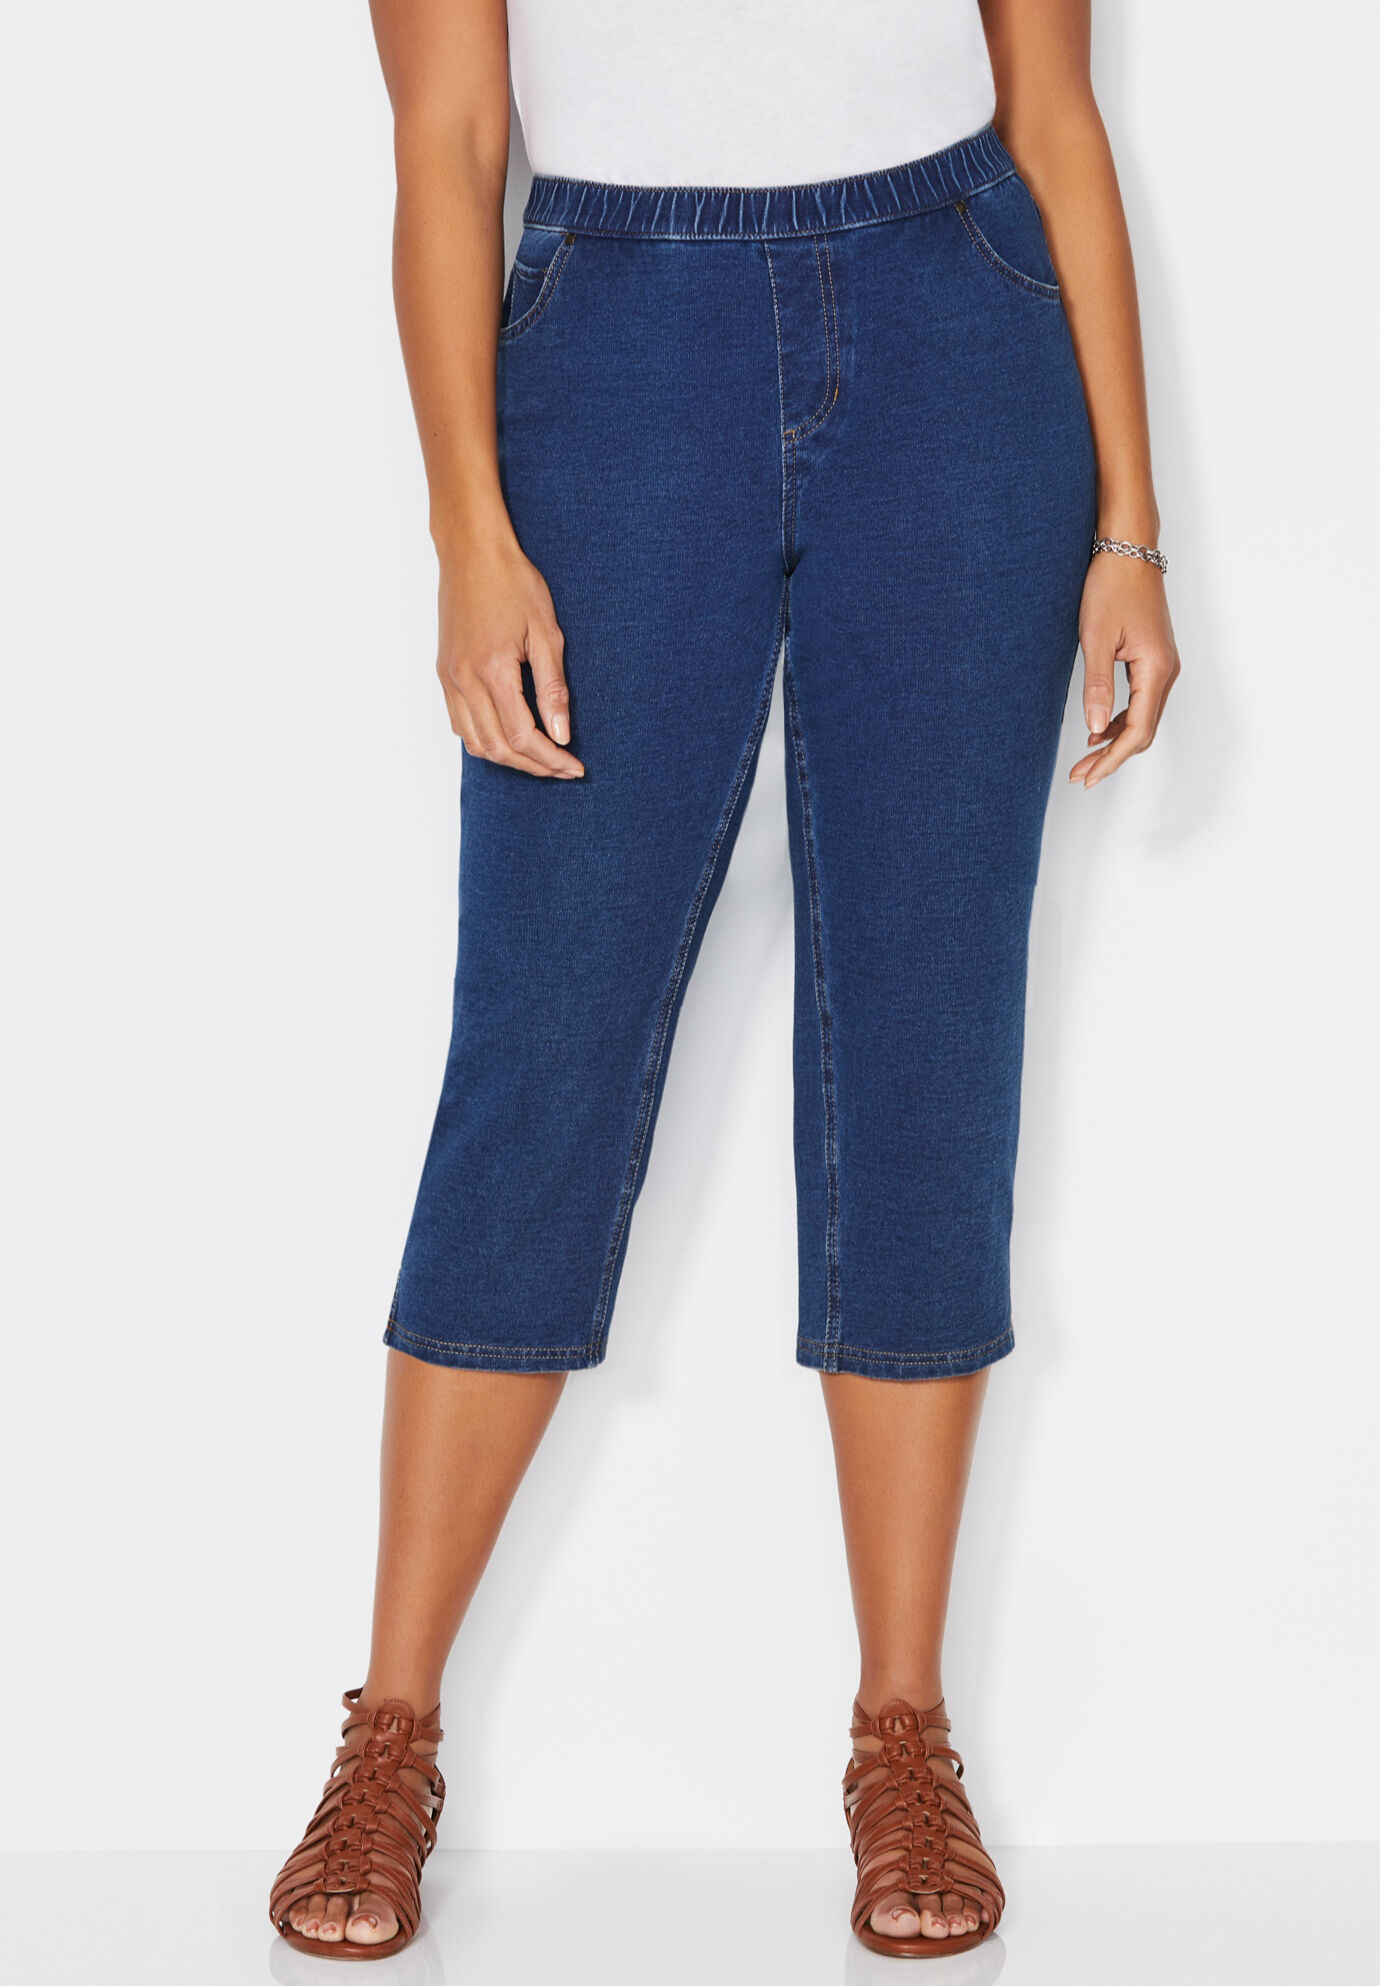 Plus Size Women's Jeans & Jeggings | Catherines